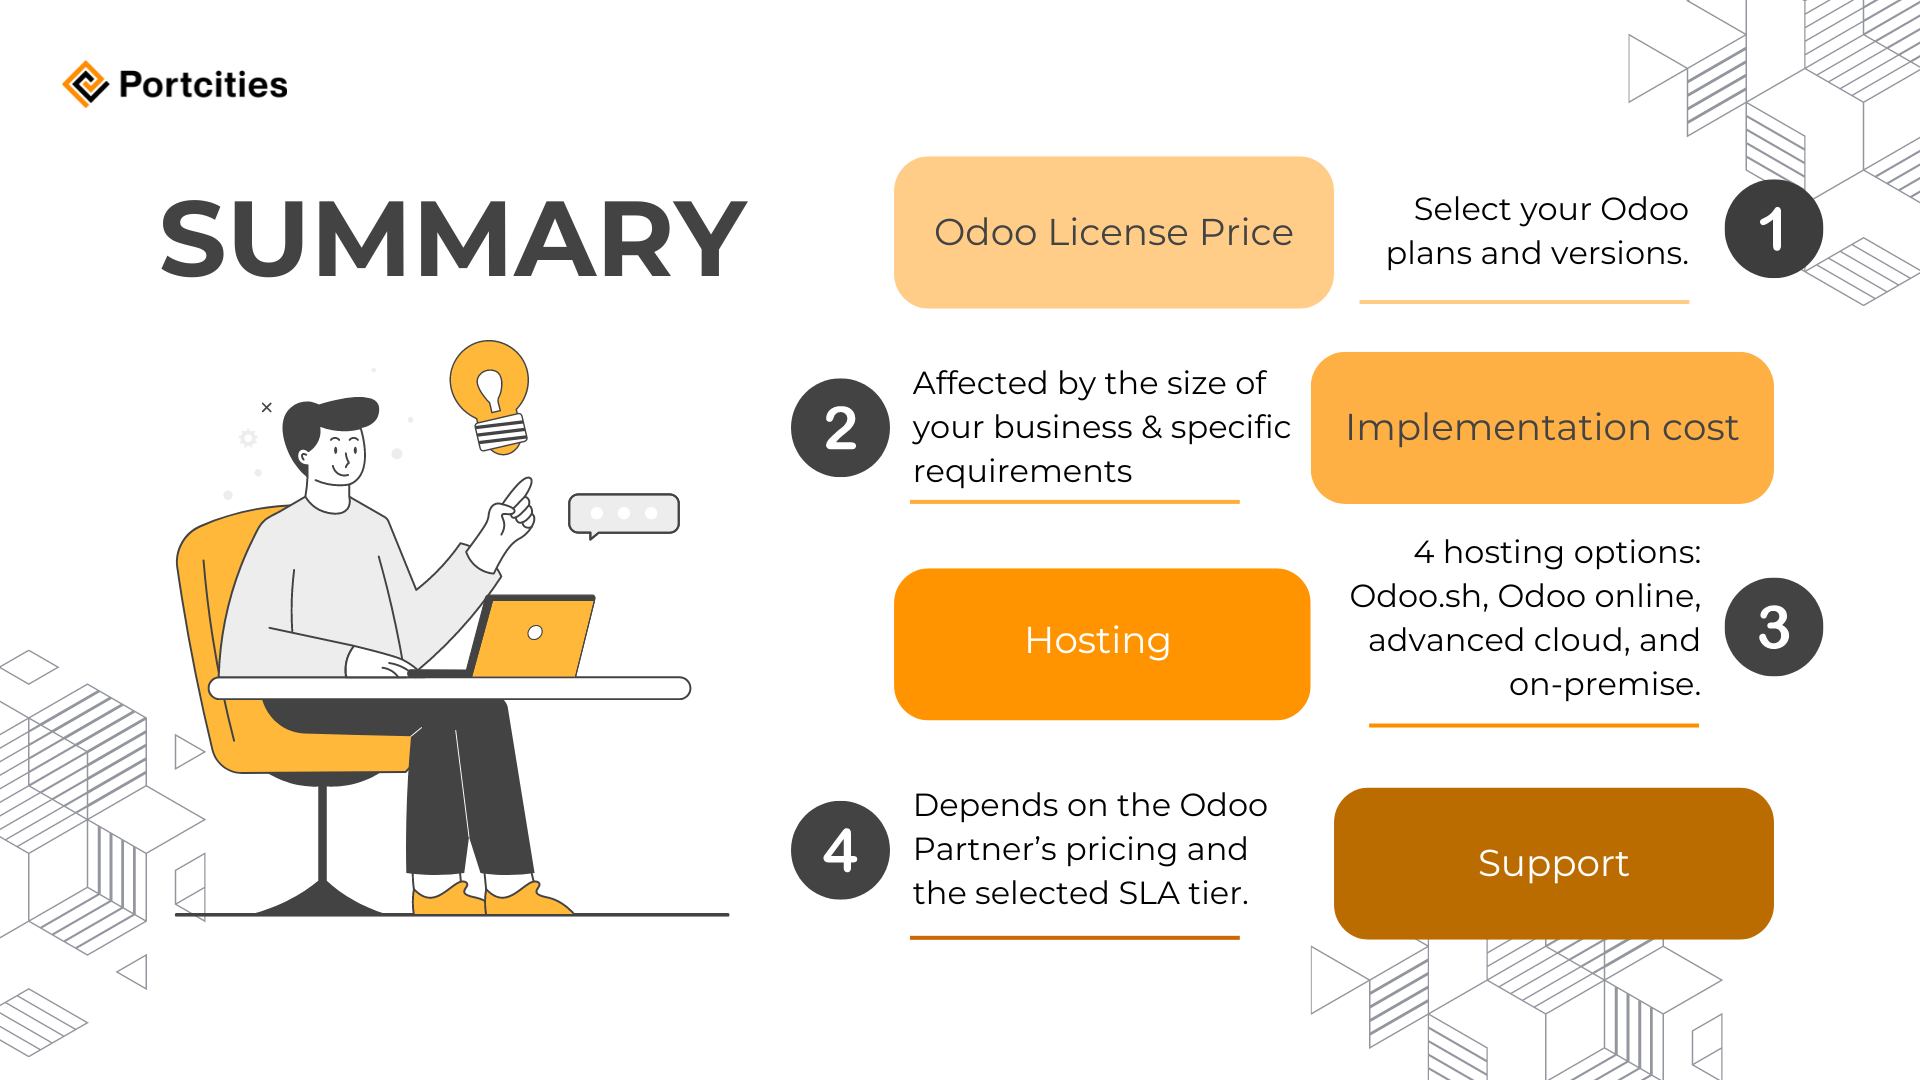 Odoo pricing summary by Portcities - License, Implementation, Hosting, Support